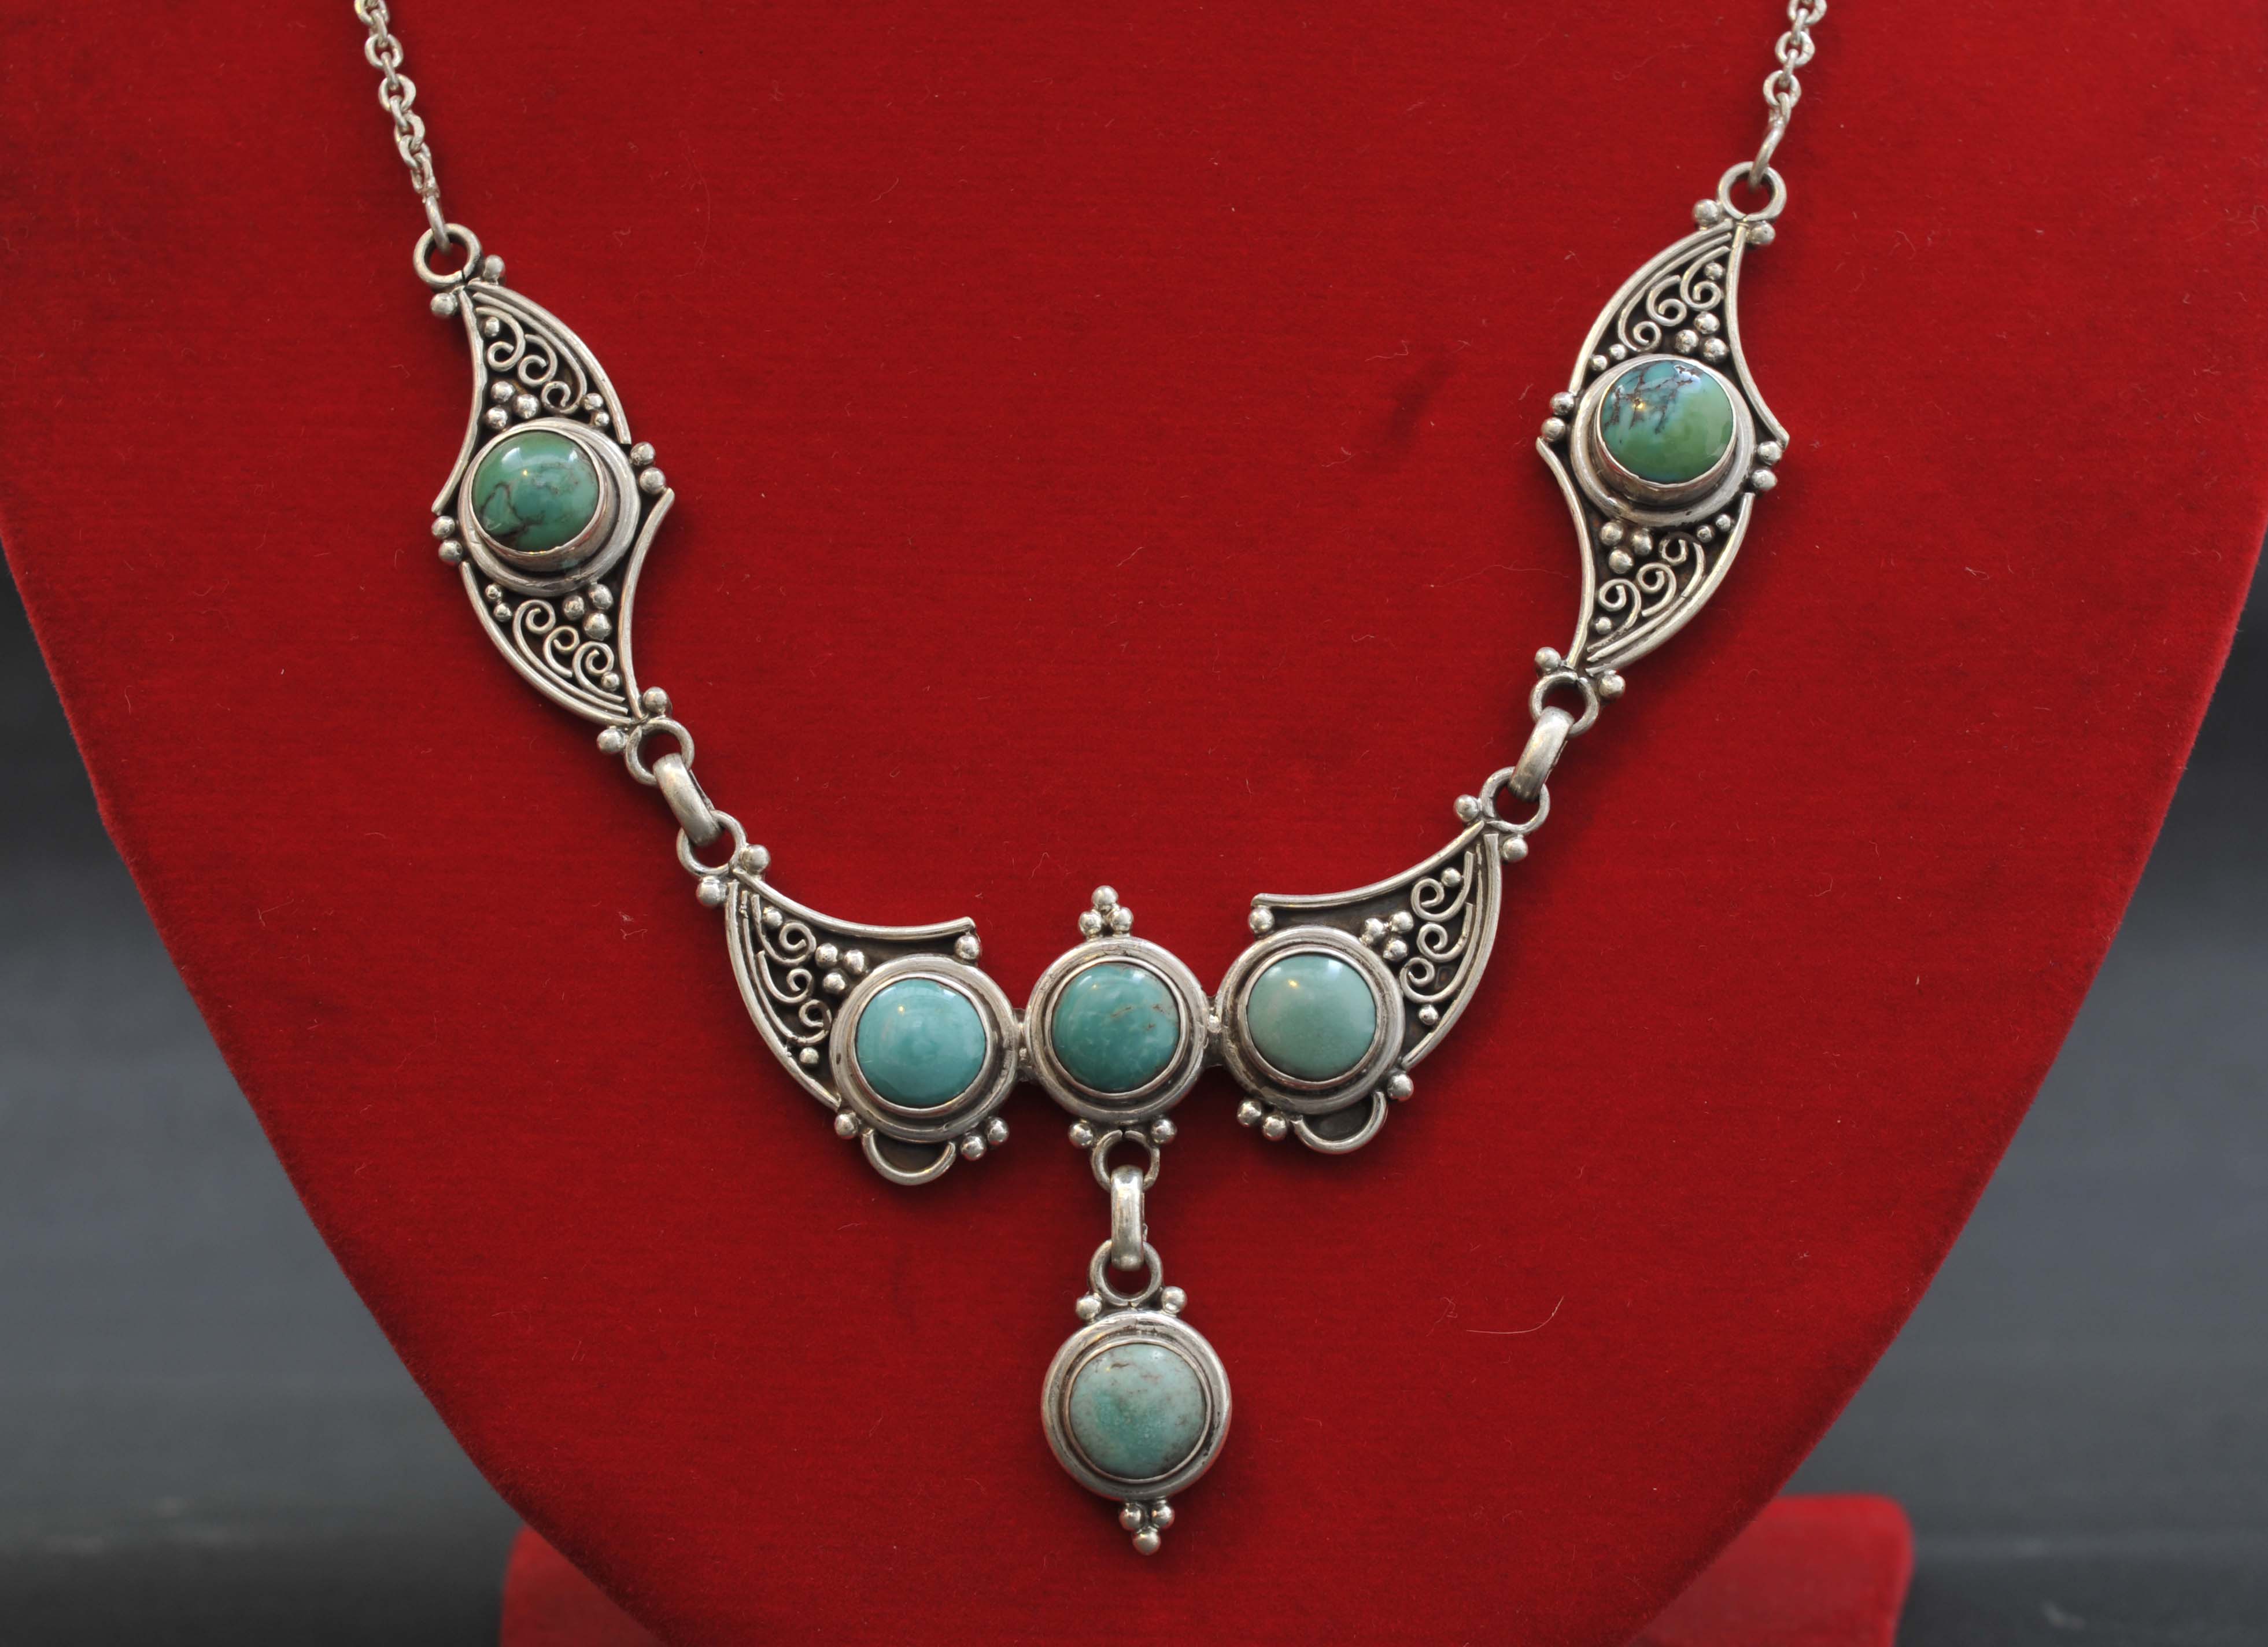 Designer Silver Necklace Of Blue Stone Three In A Row Design (turquoise).